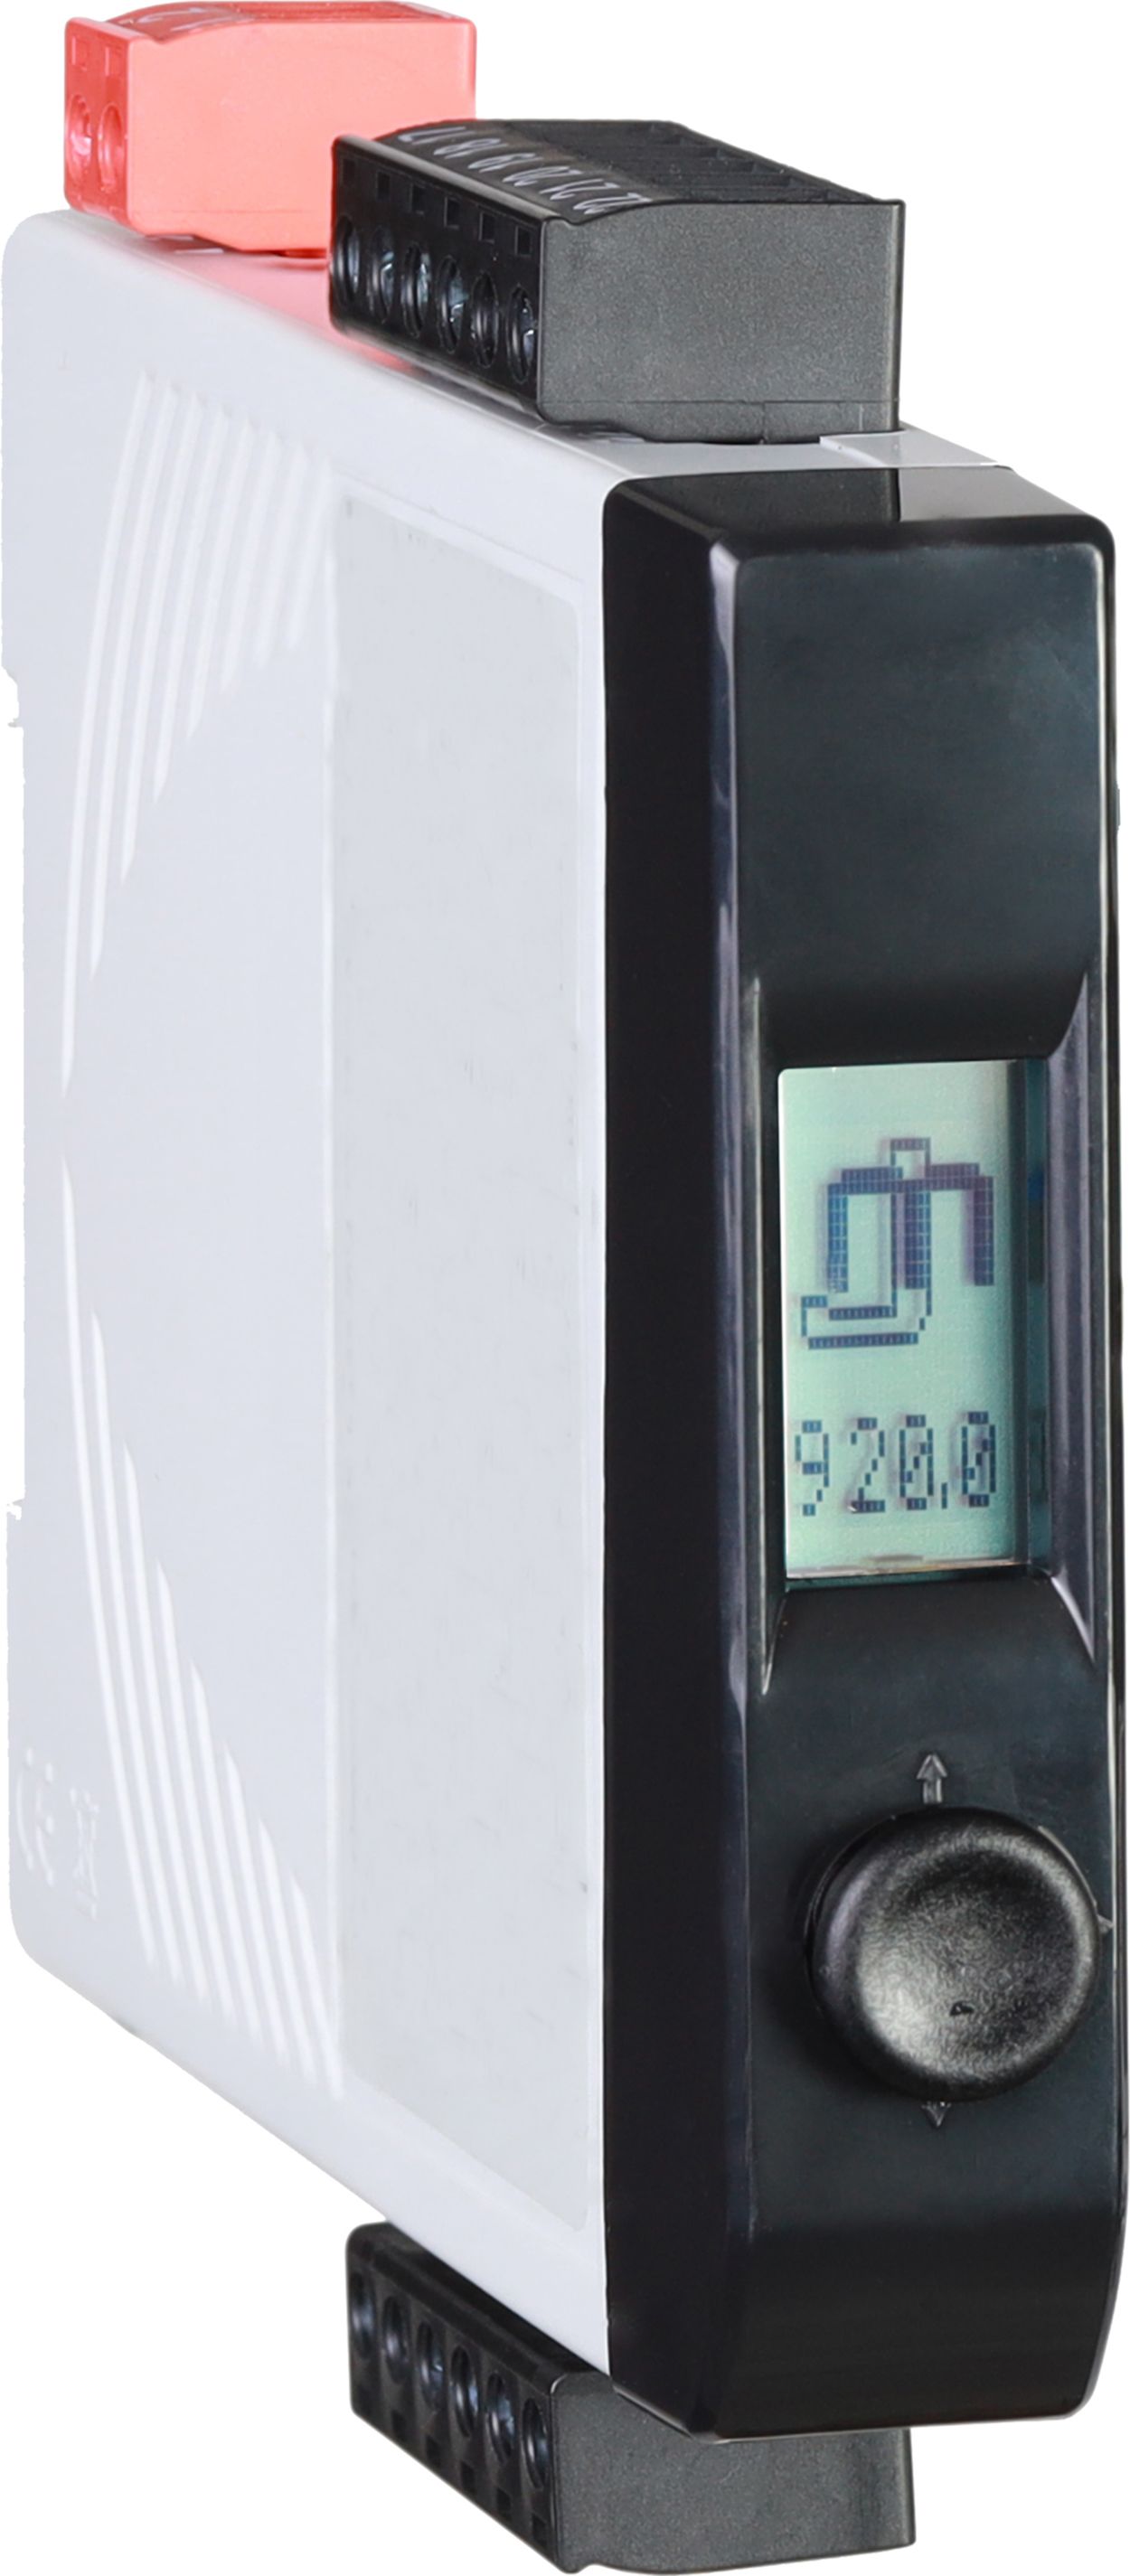 JM CONCEPT ULCOS 900 Series Universal Signal Converter, Current, Linear Resistance, Potentiometer, RTD, Thermocouple